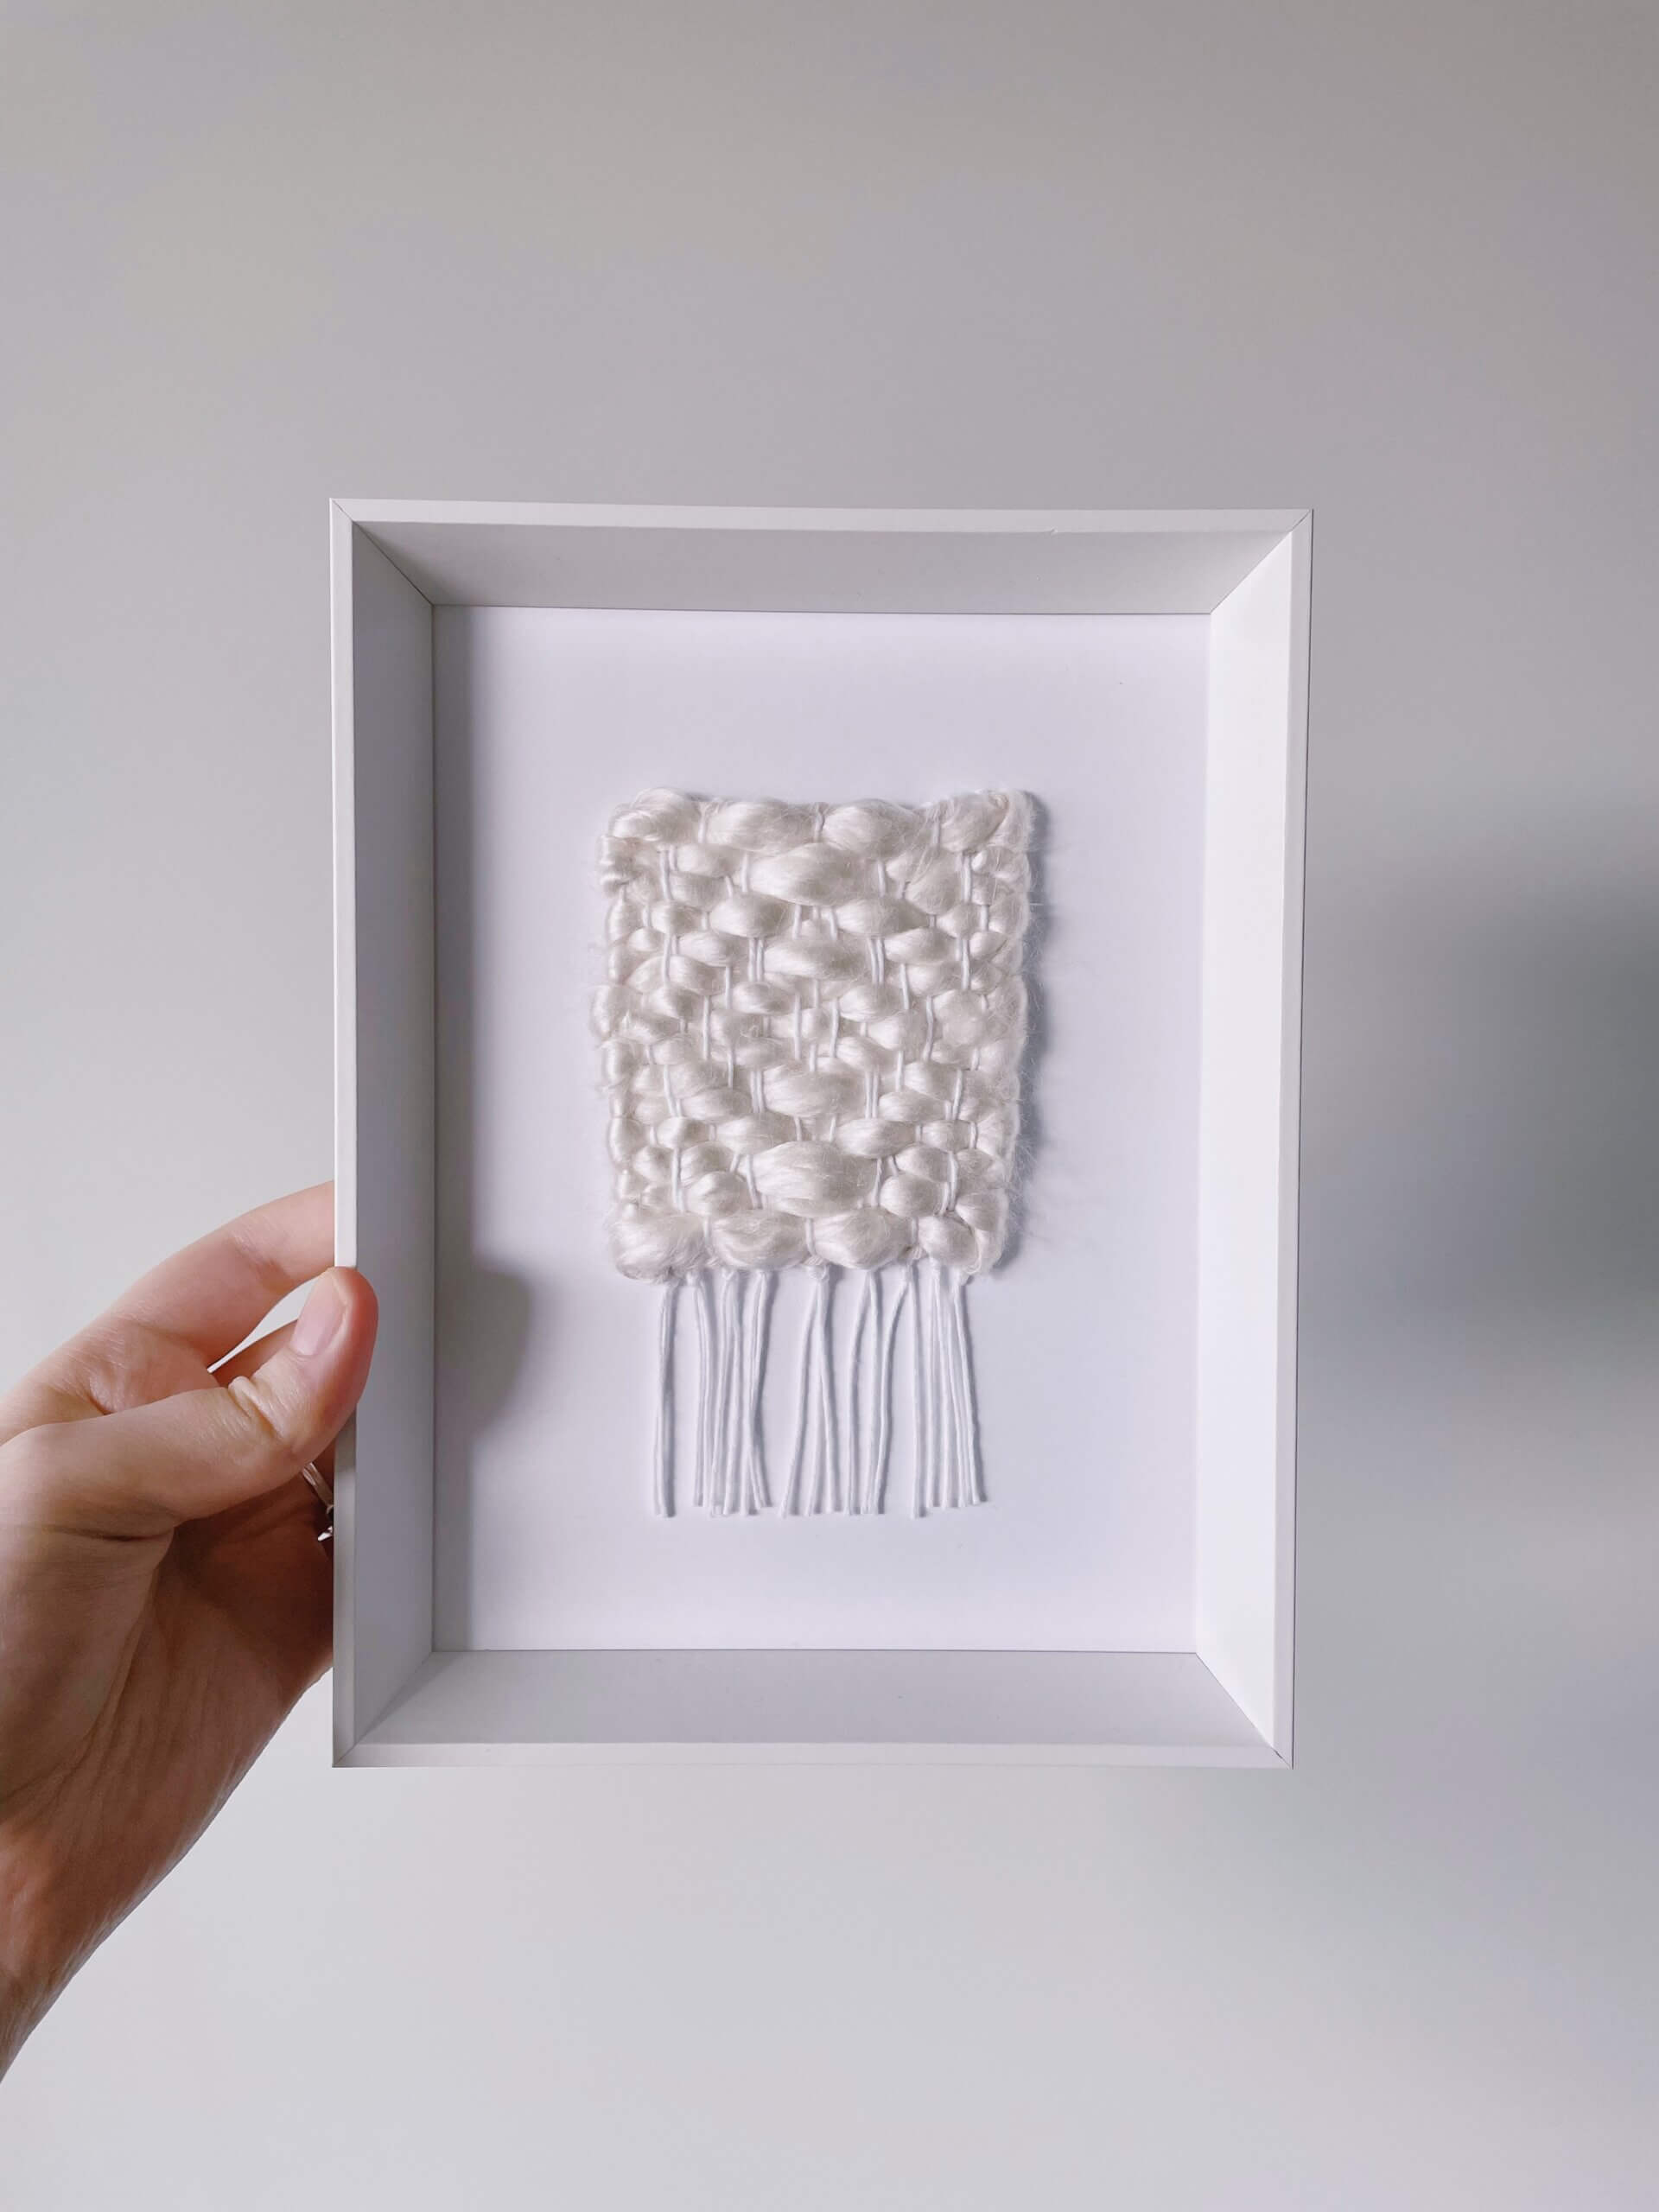 A white knitted square that is framed